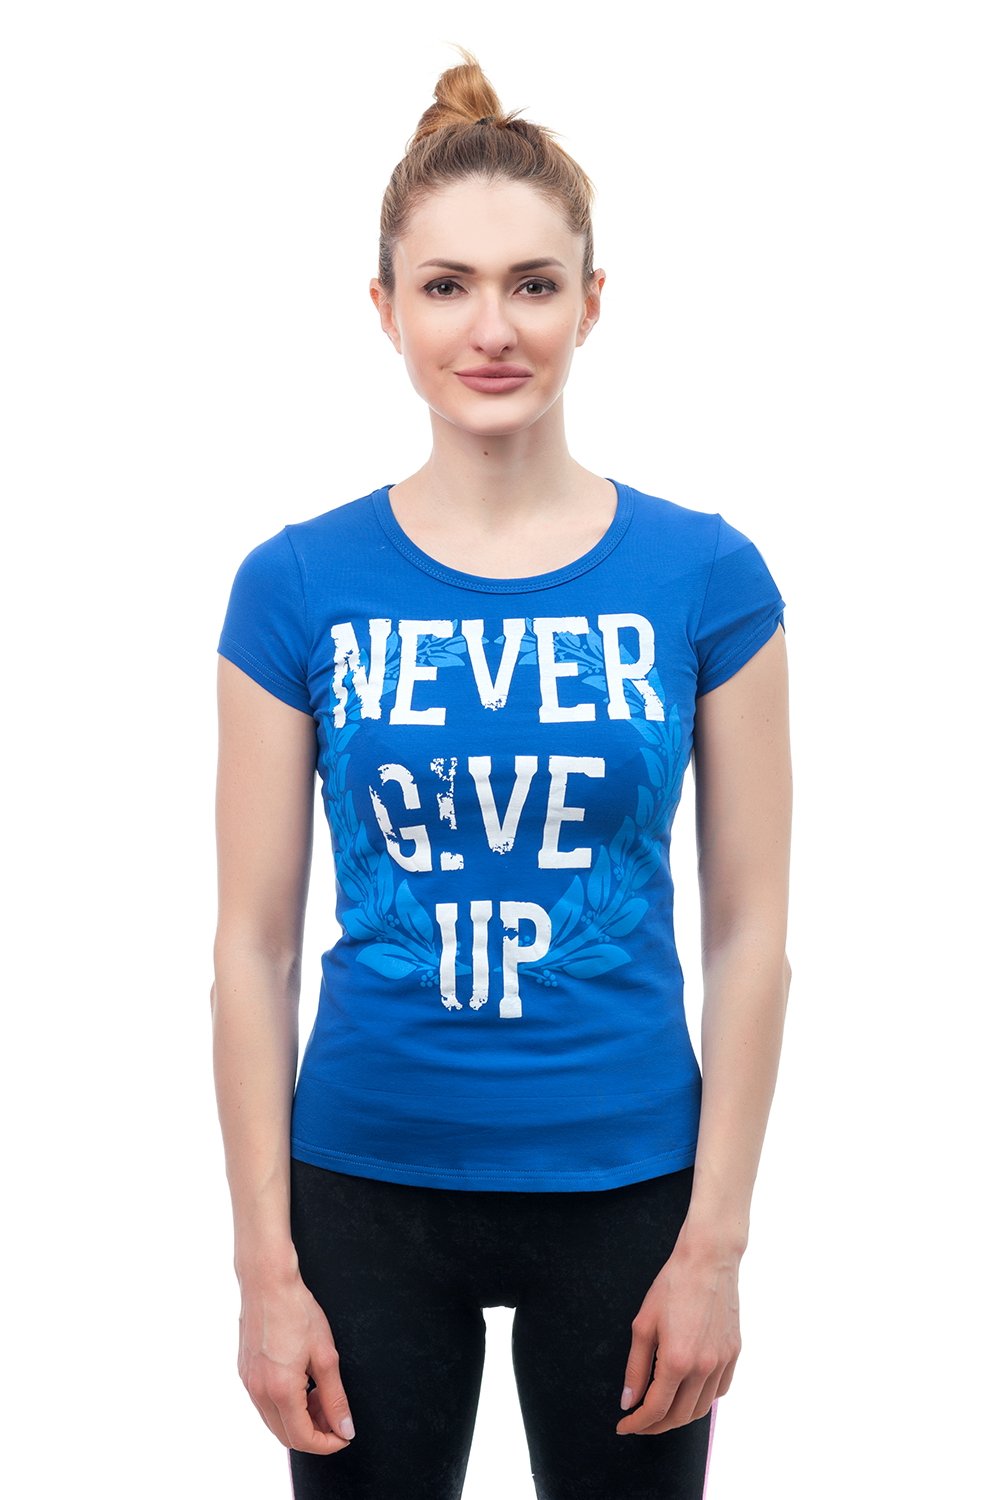 Women's T-shirt Never give up, blue, electric, XS